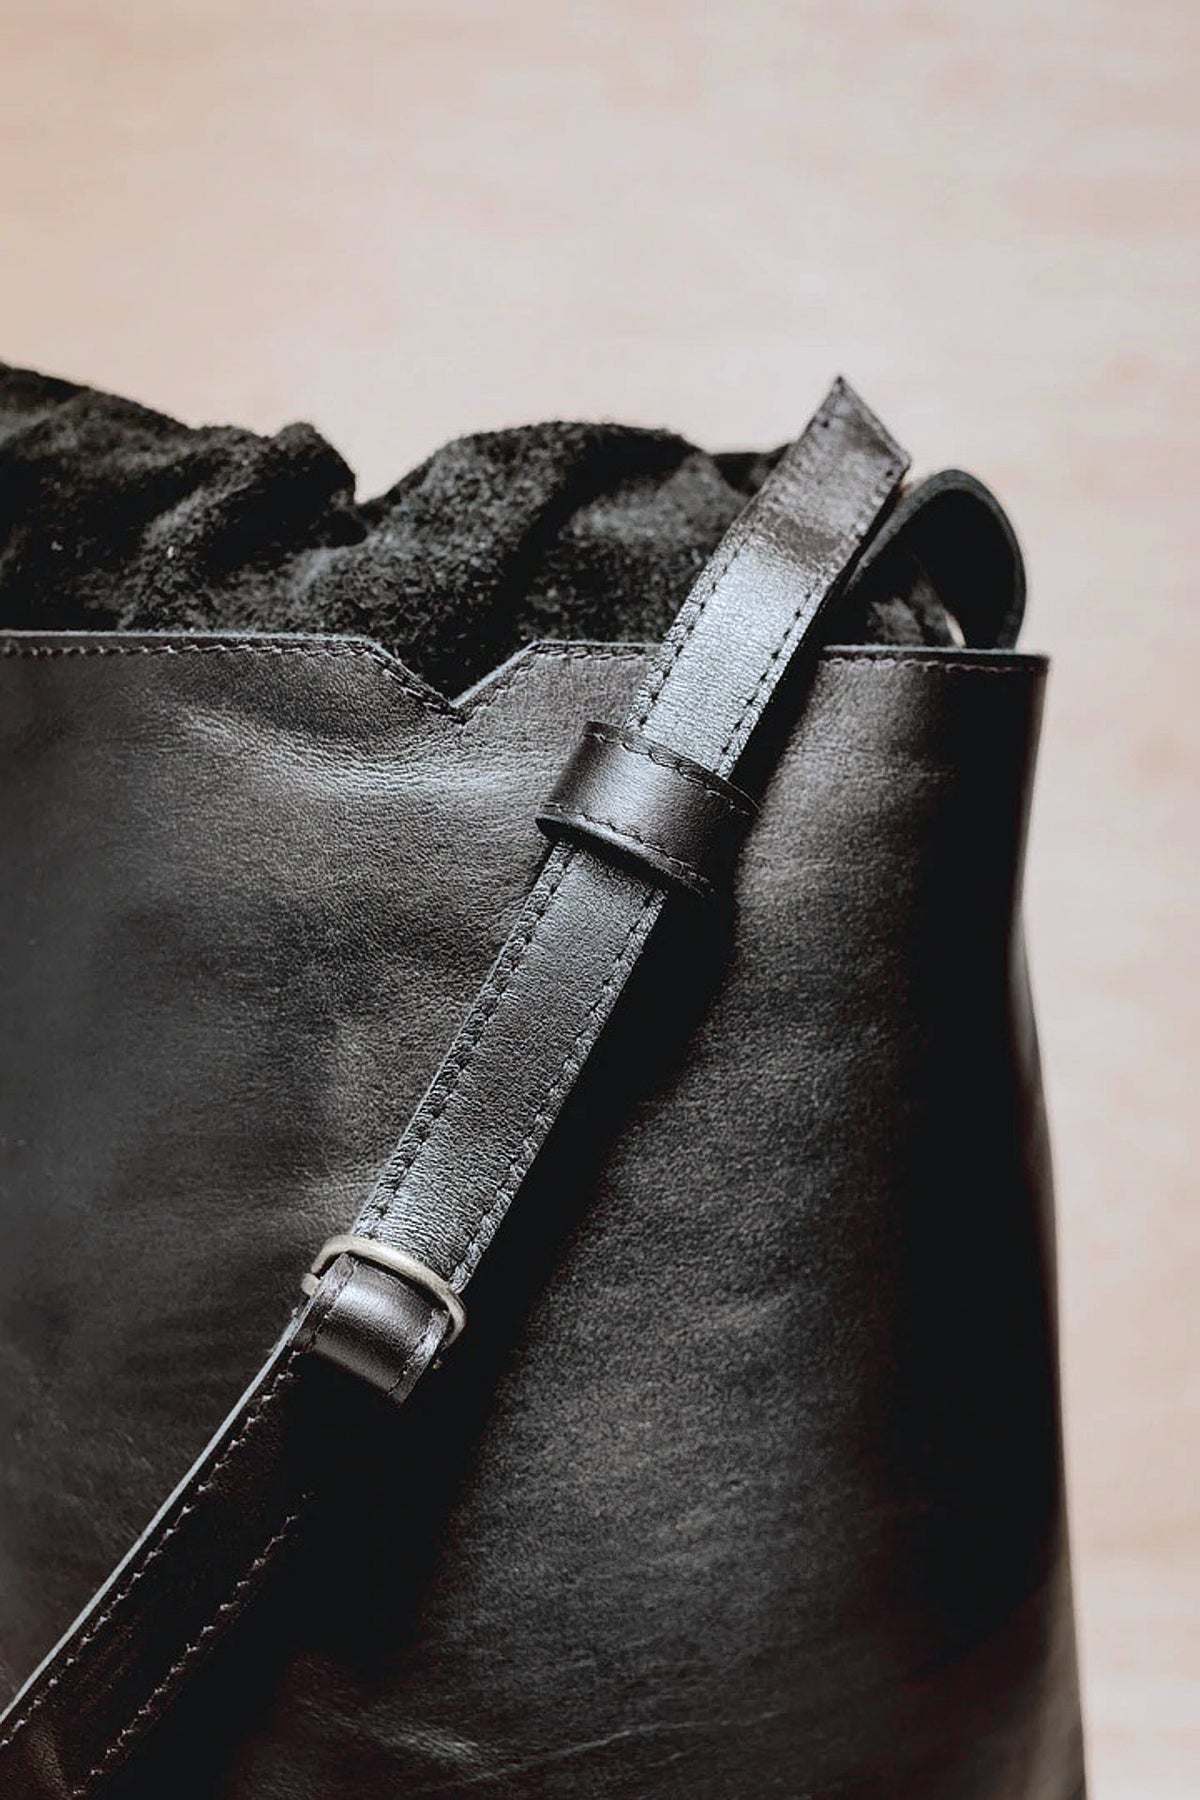 A Lets Dance black leather bag with a strap from Kohl &amp; Co.